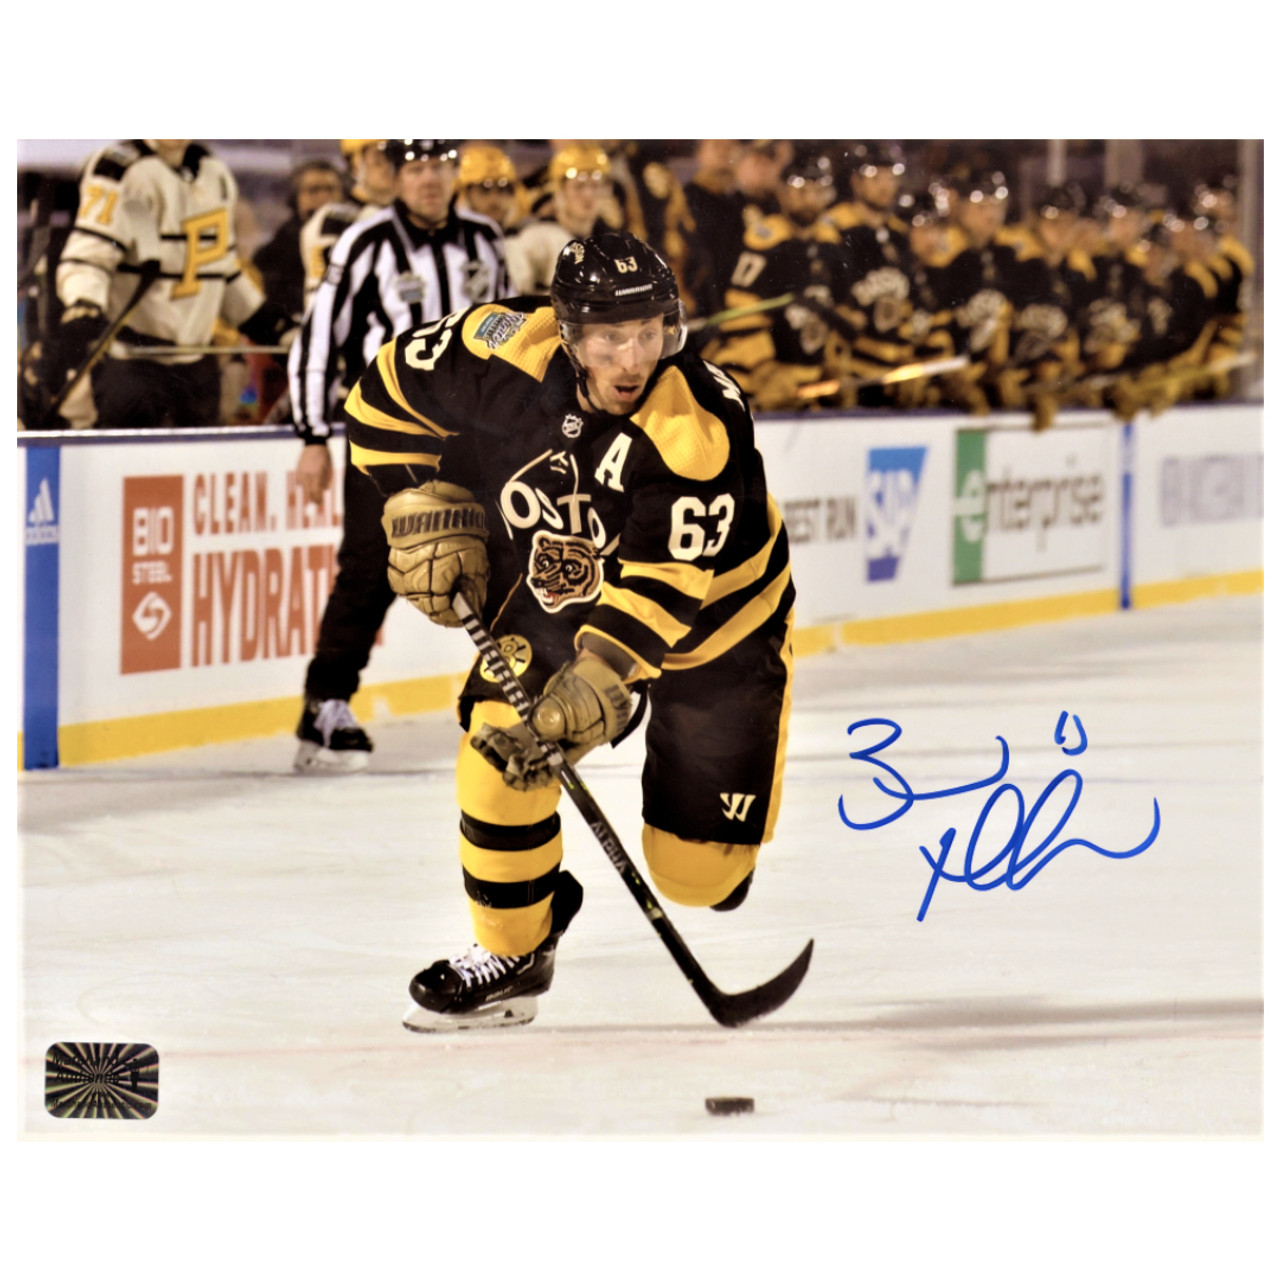 Brad Marchand NHL Memorabilia, Brad Marchand Collectibles, Verified Signed  Brad Marchand Photos